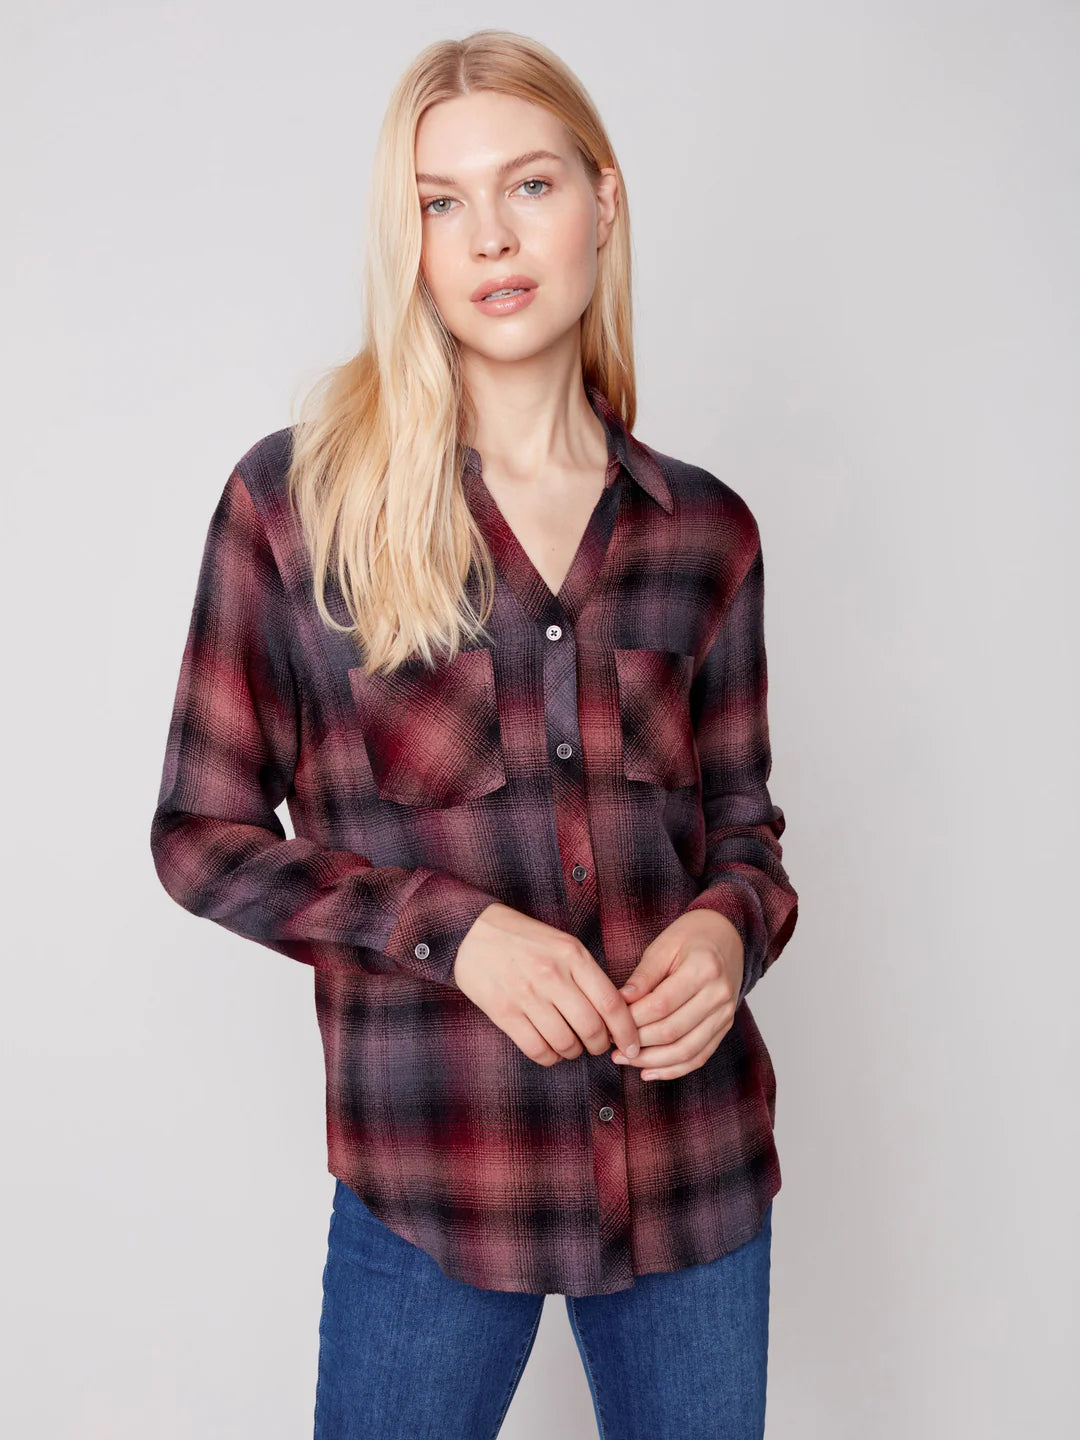 Charlie B Plaid Blouse in Port